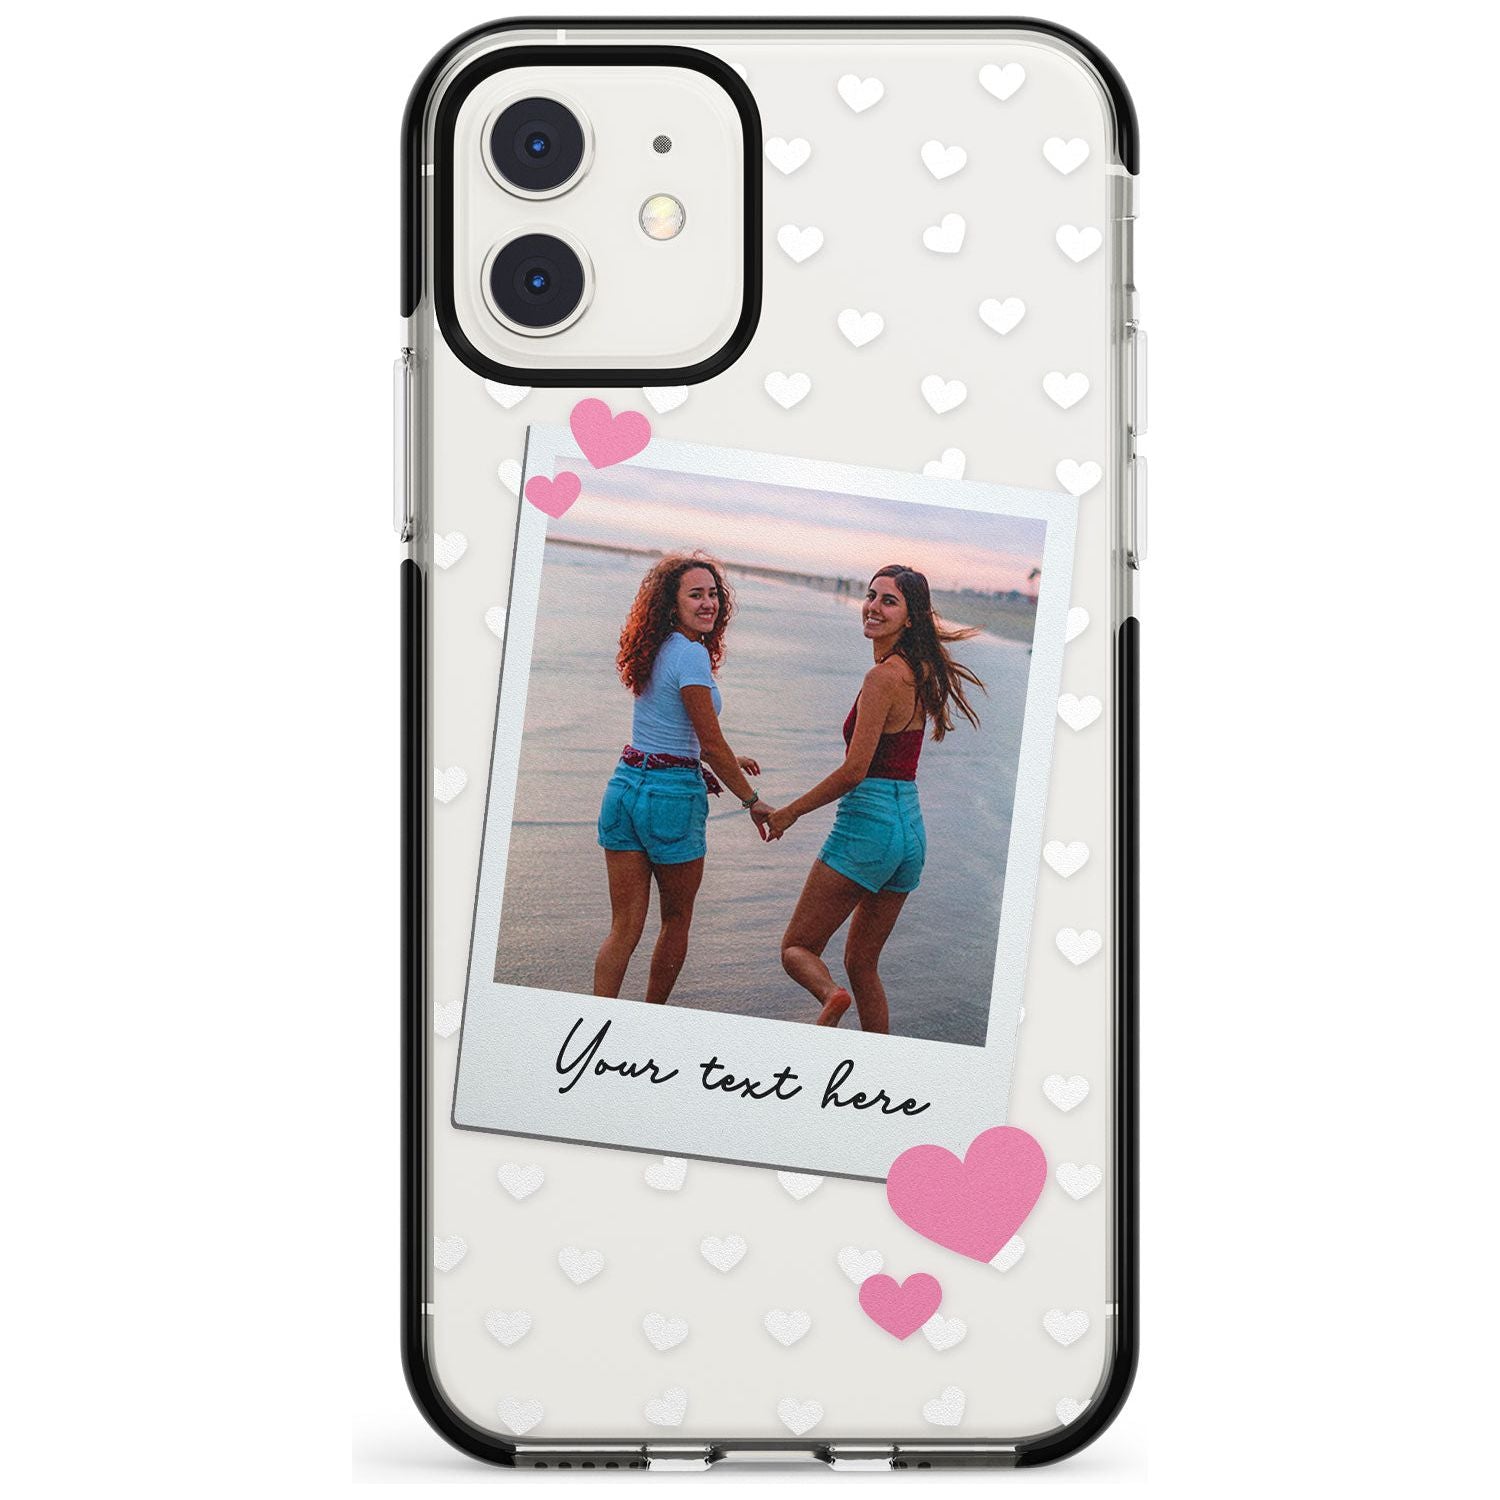 Instant Film & Hearts Pink Fade Impact Phone Case for iPhone 11 Pro Max